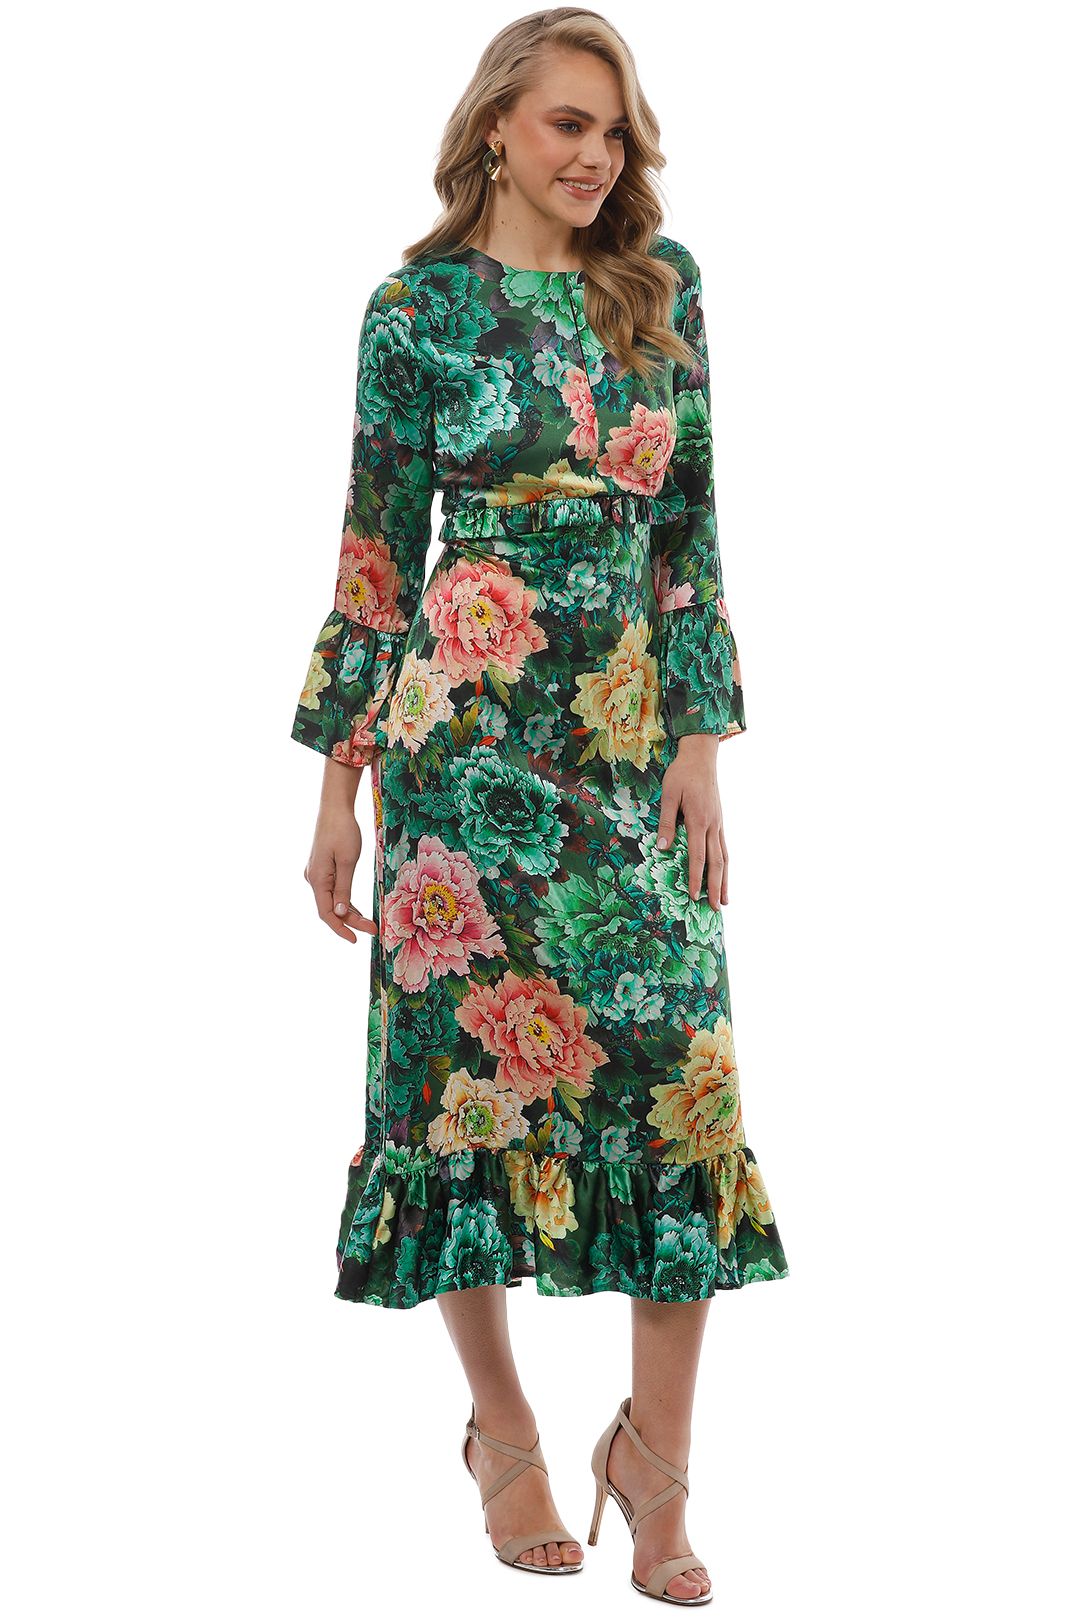 Trelise Cooper - Kill Them With Kindness Dress - Green Floral - Side